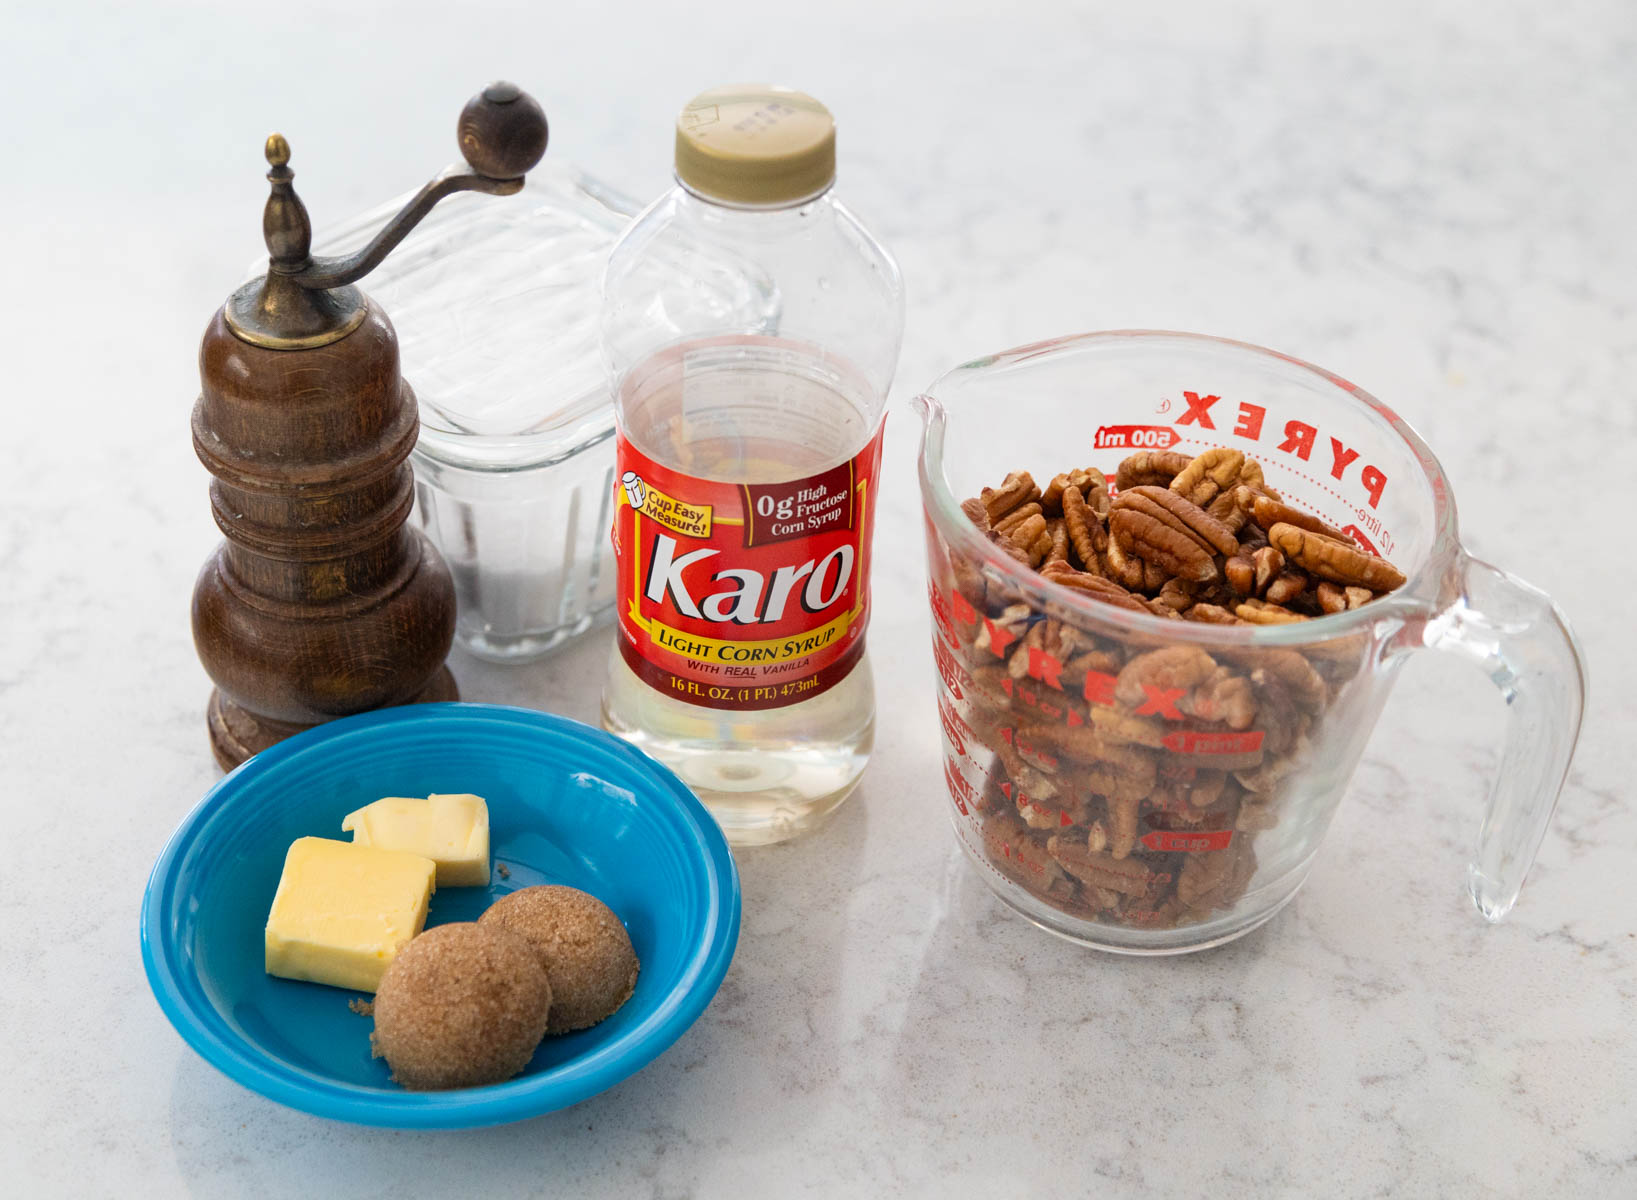 The cup of pecans is on the counter next to the rest of the ingredients used to make the glaze.